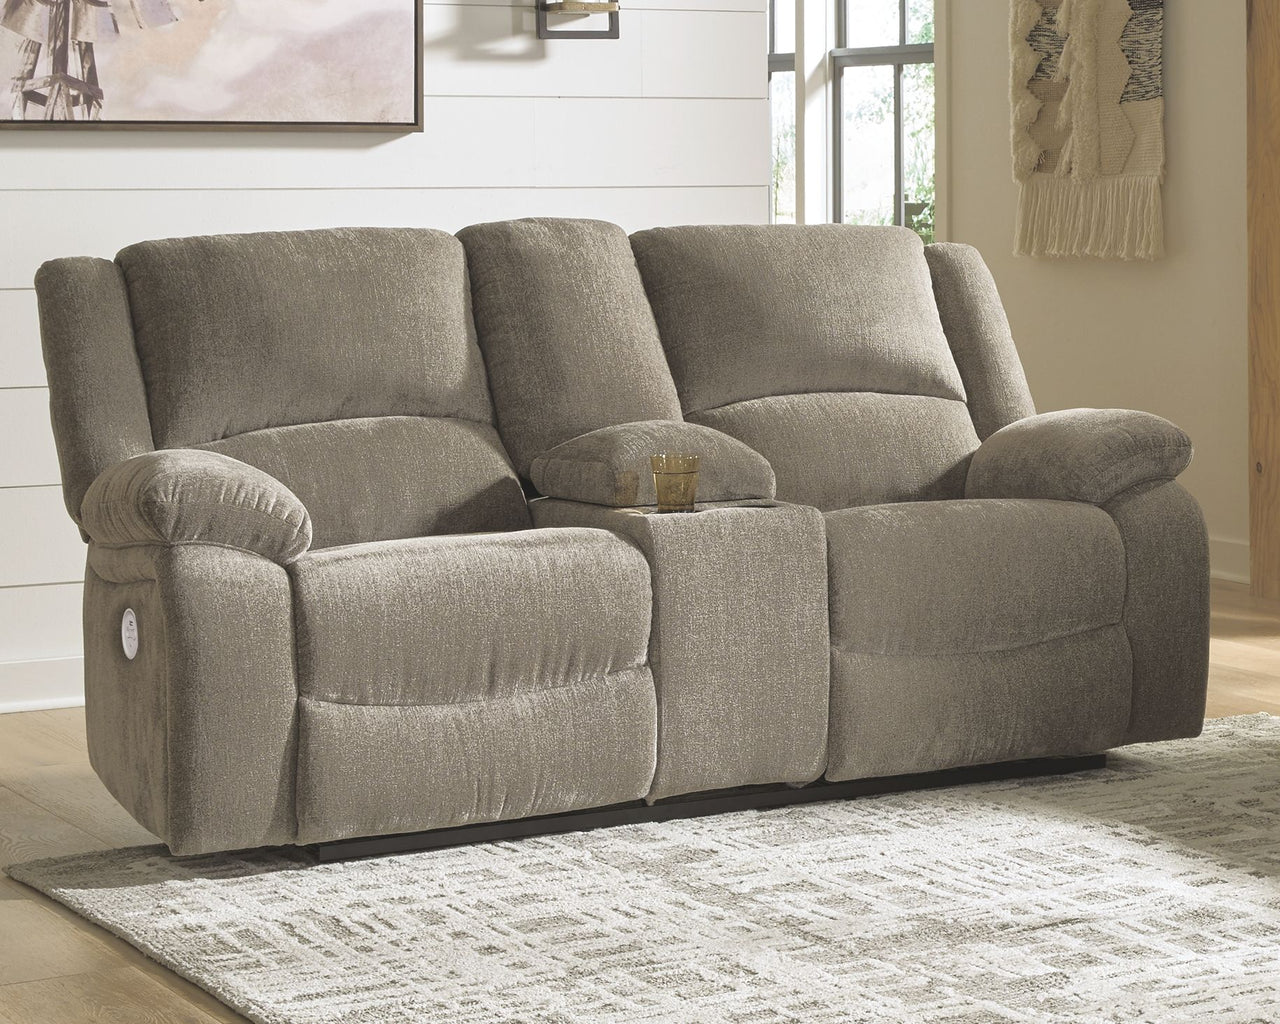 Draycoll - Pewter - Dbl Rec Pwr Loveseat W/Console - Tony's Home Furnishings